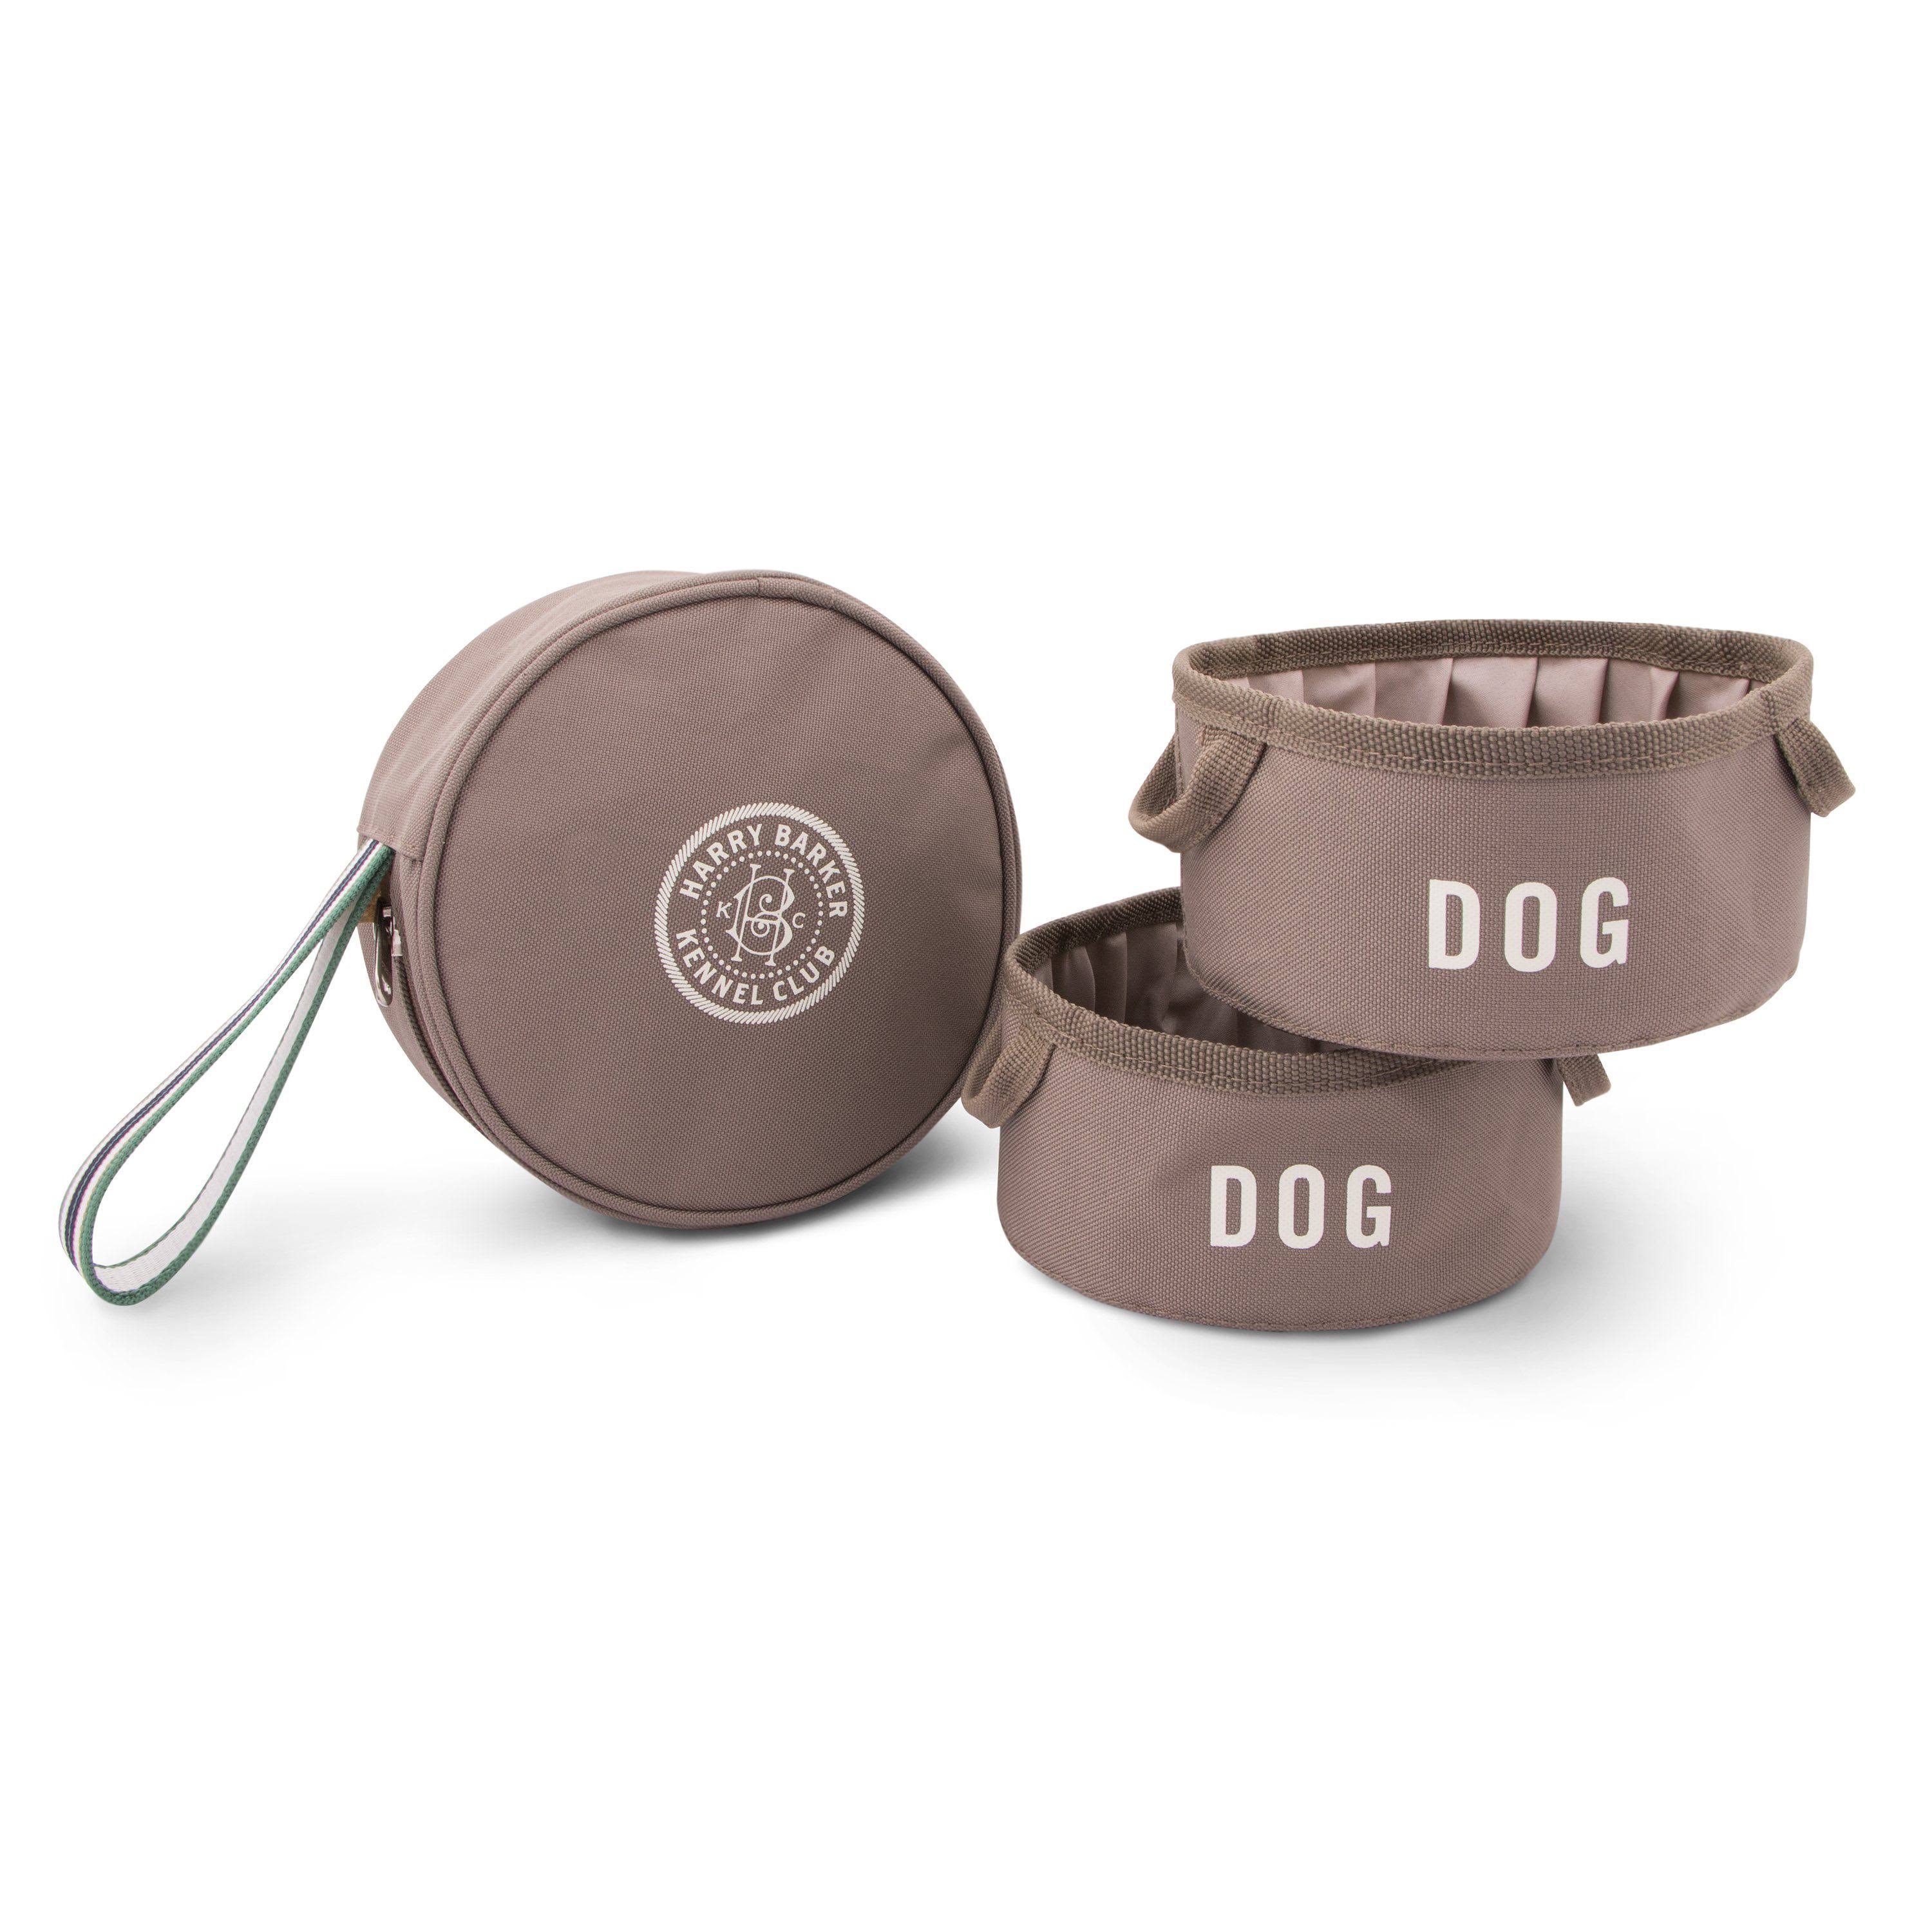 Harry Barker Kennel Club Fold-Up Travel Bowls and Case Set